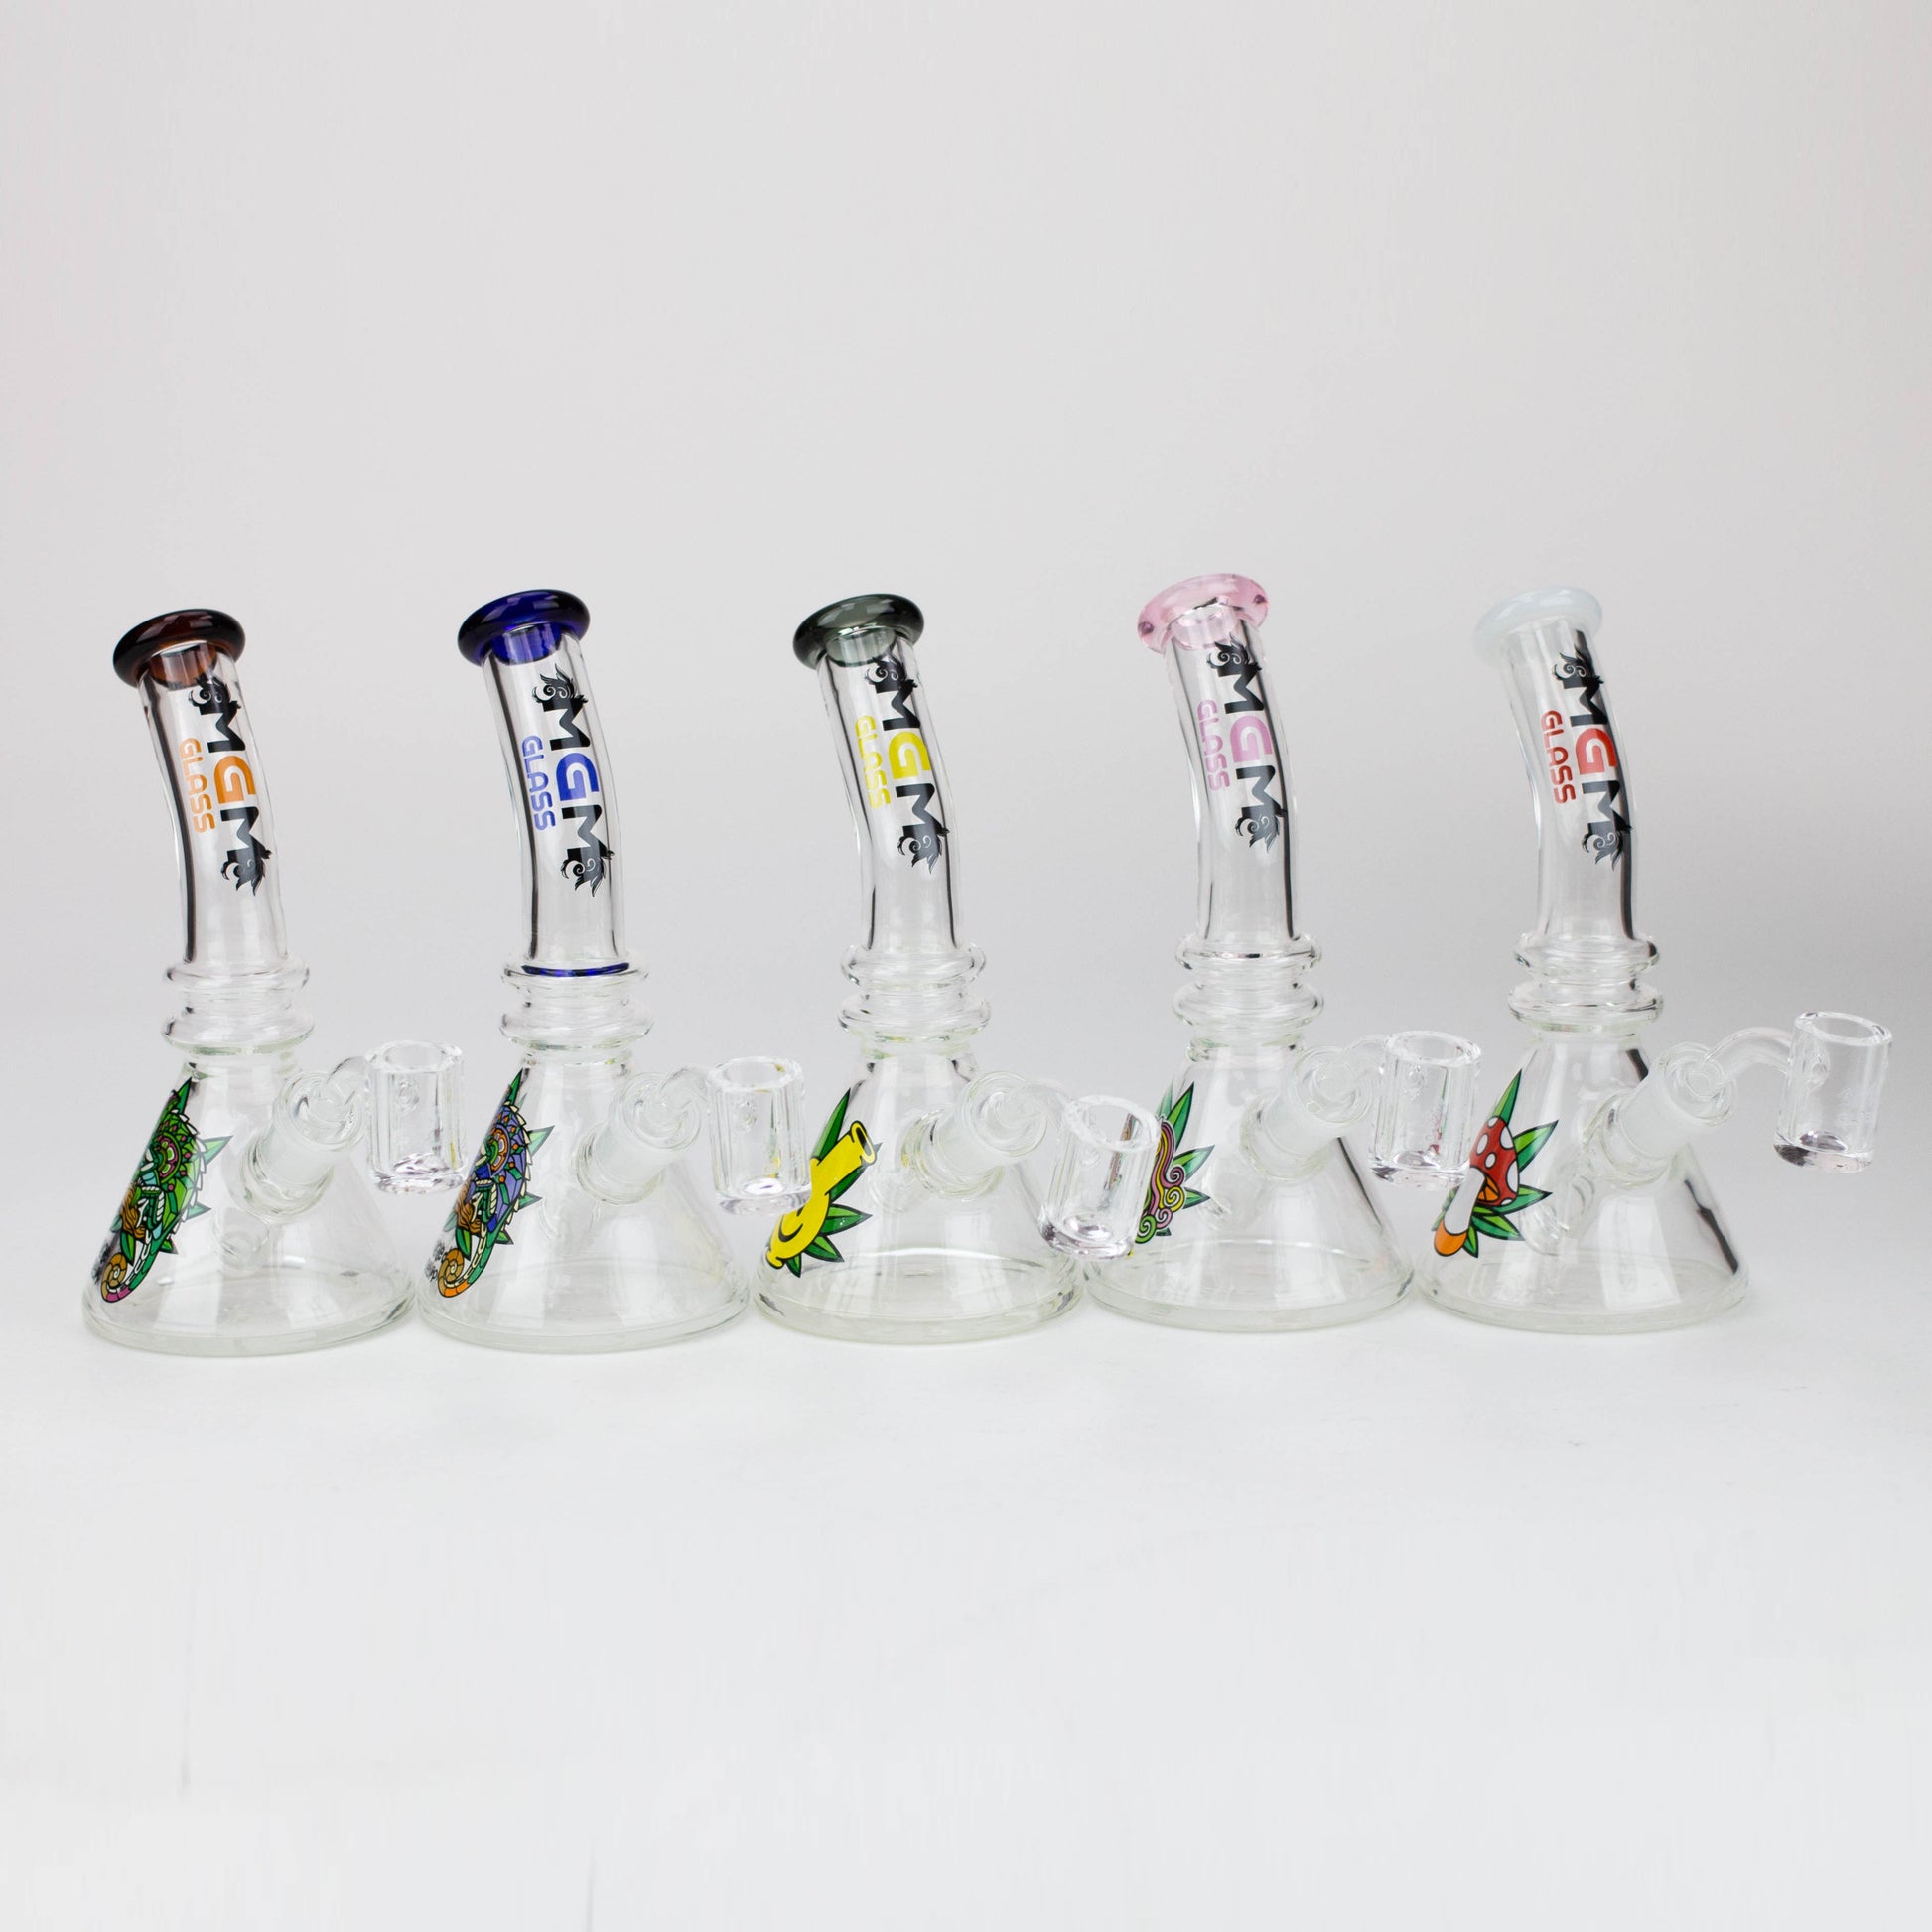 6.3" MGM Glass 2-in-1 bubbler with Graphic [C2671]_0